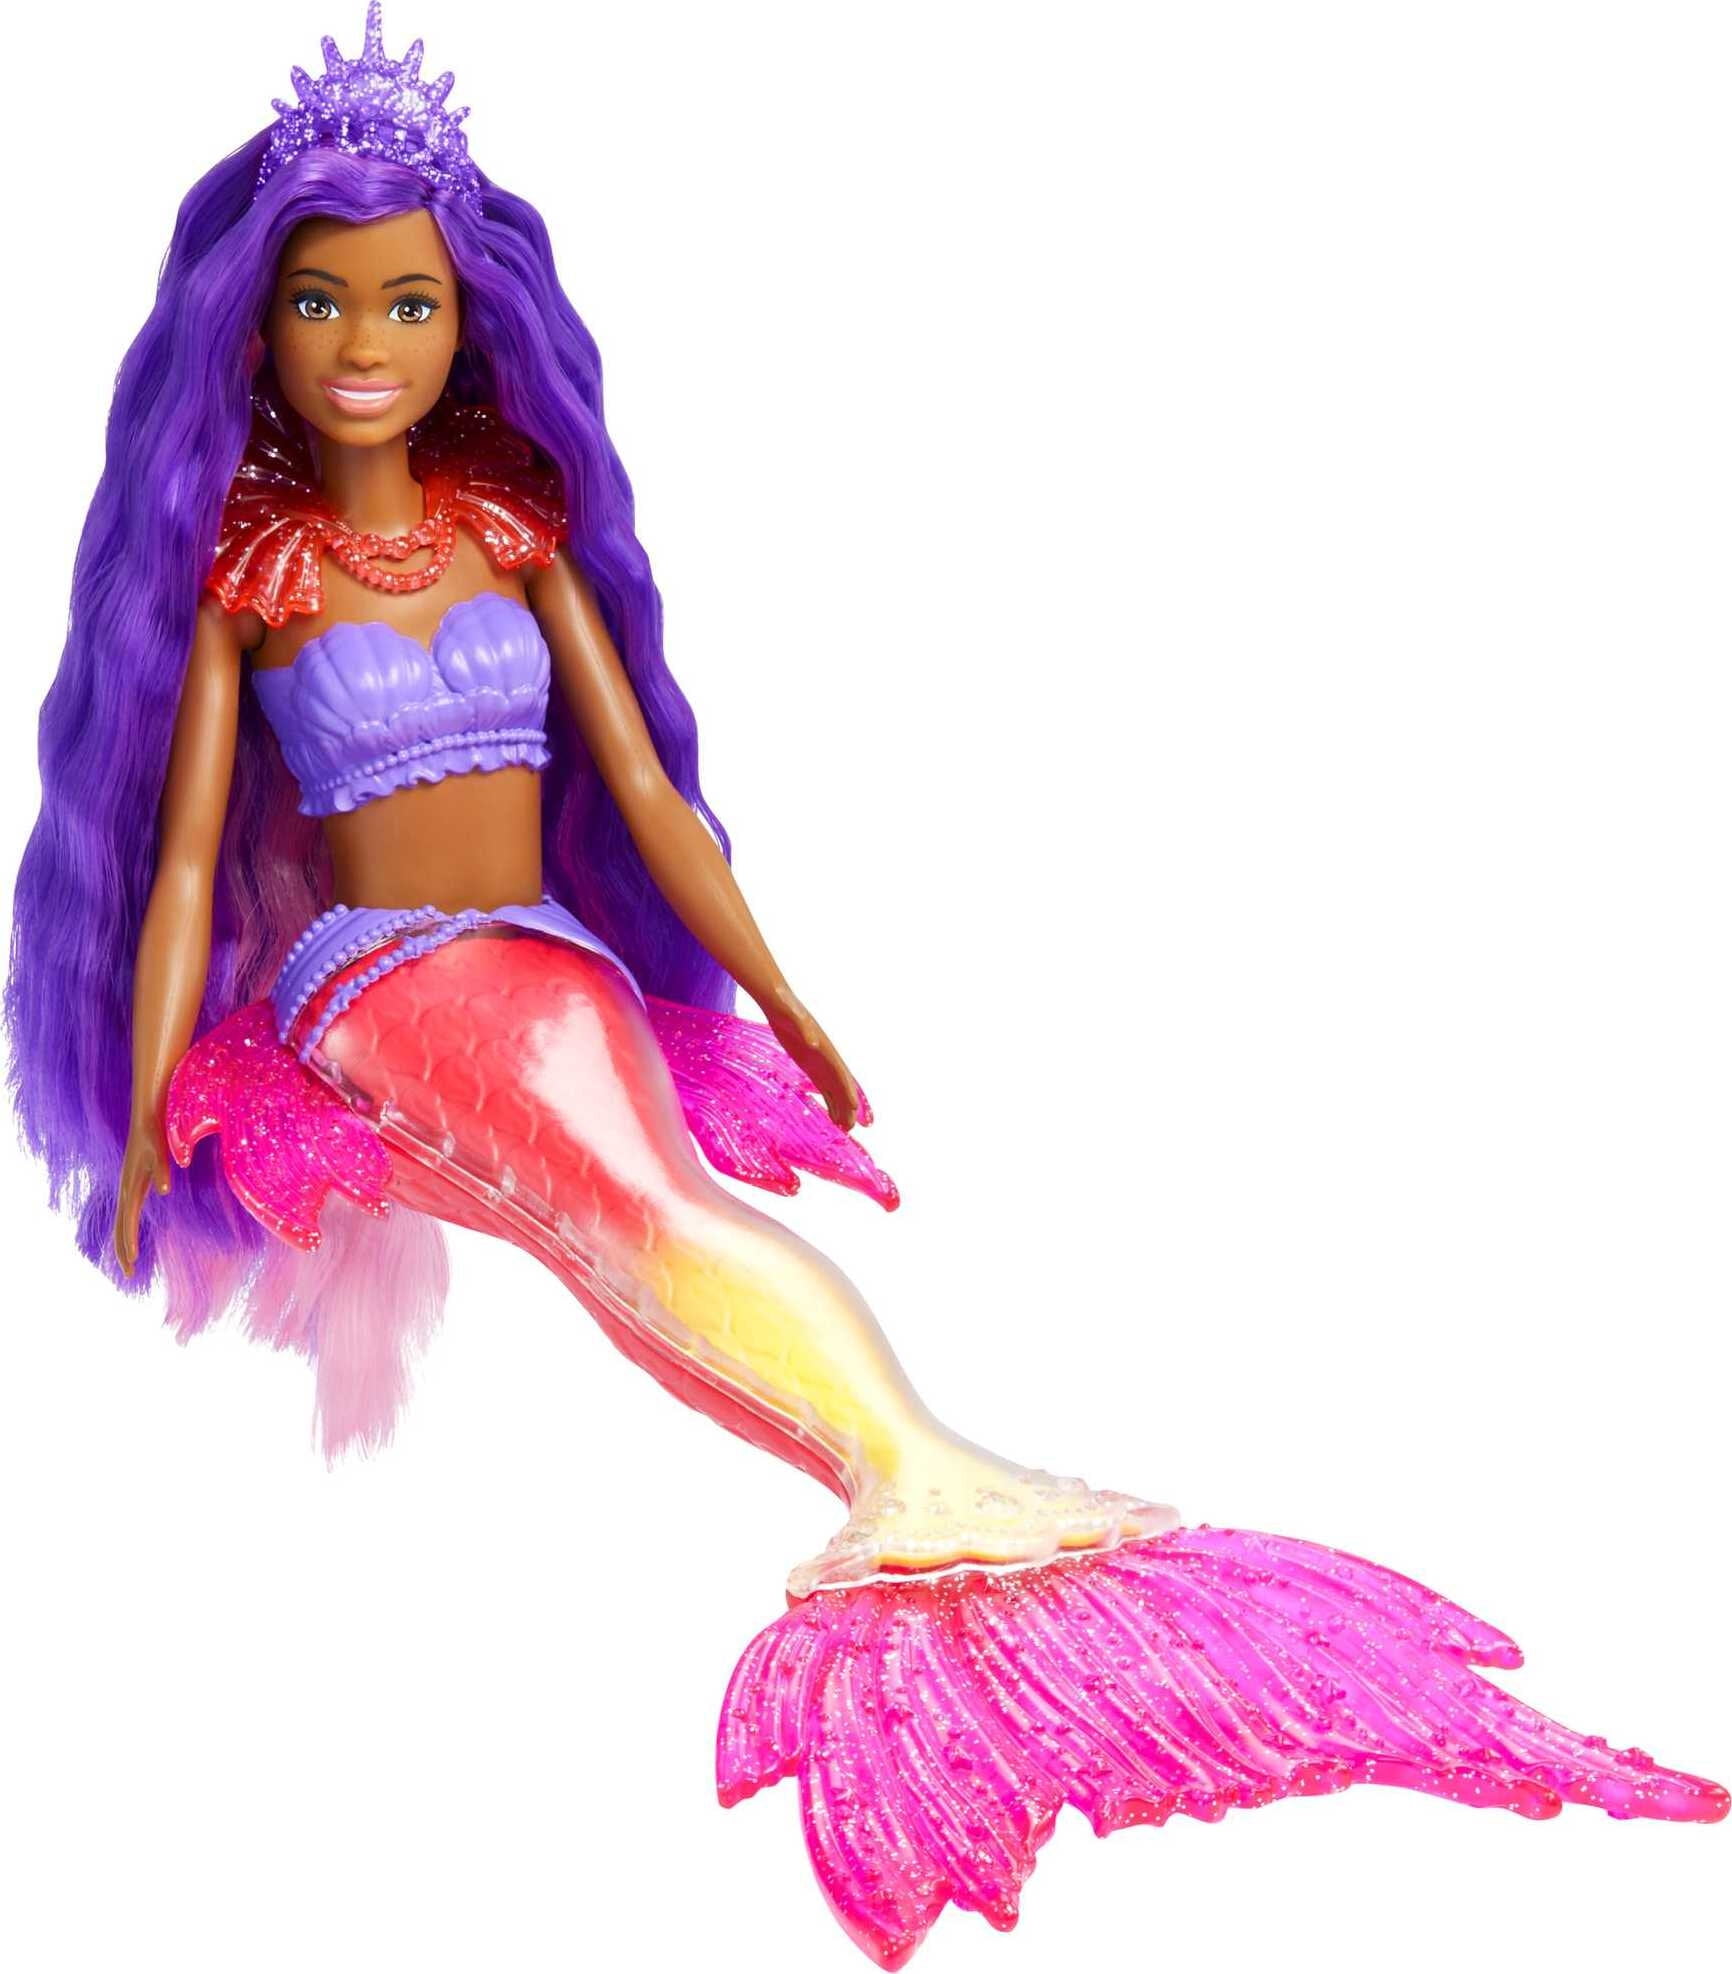 Hair Accessories Mermaid Toys Gifts for Girls: 6 7 8 9 Year Old